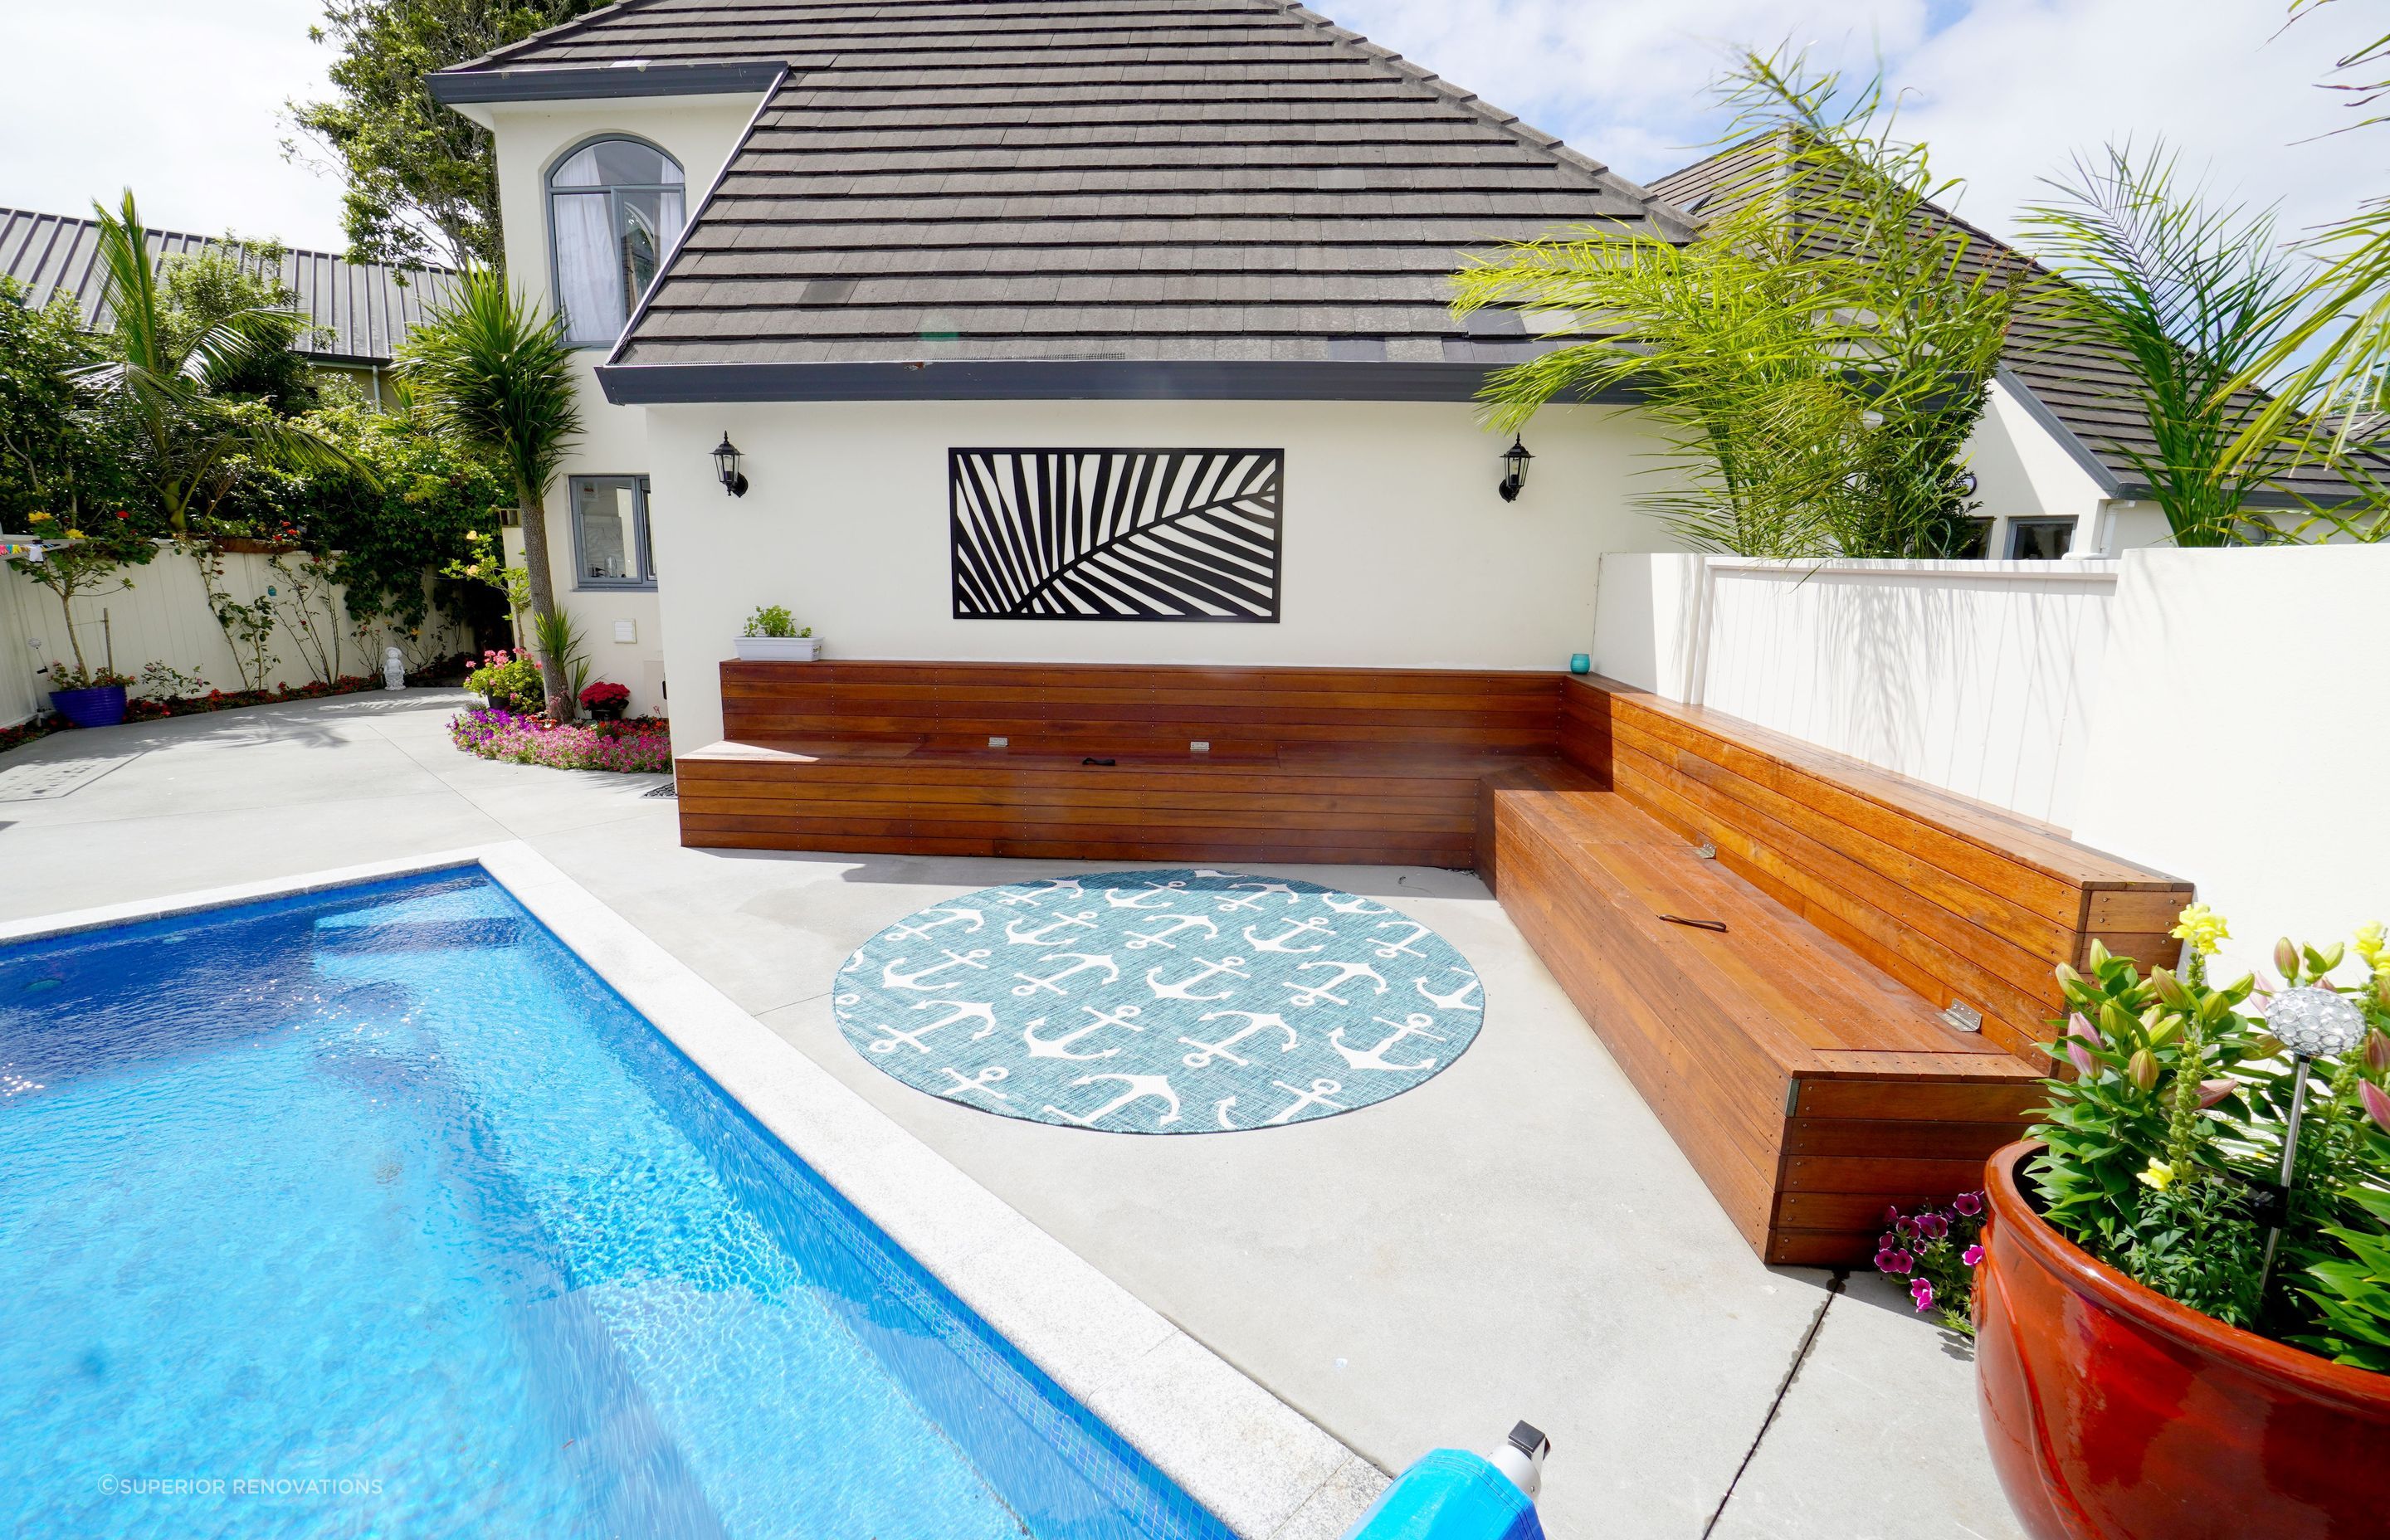 This outdoor landscaping was done as a part of an interior renovation in Epsom, Auckland. Our client loved to entertain her friends and wanted an attractive and welcoming space outdoors where they could relax. We custom built the benches that can be seen which also has storage within it.